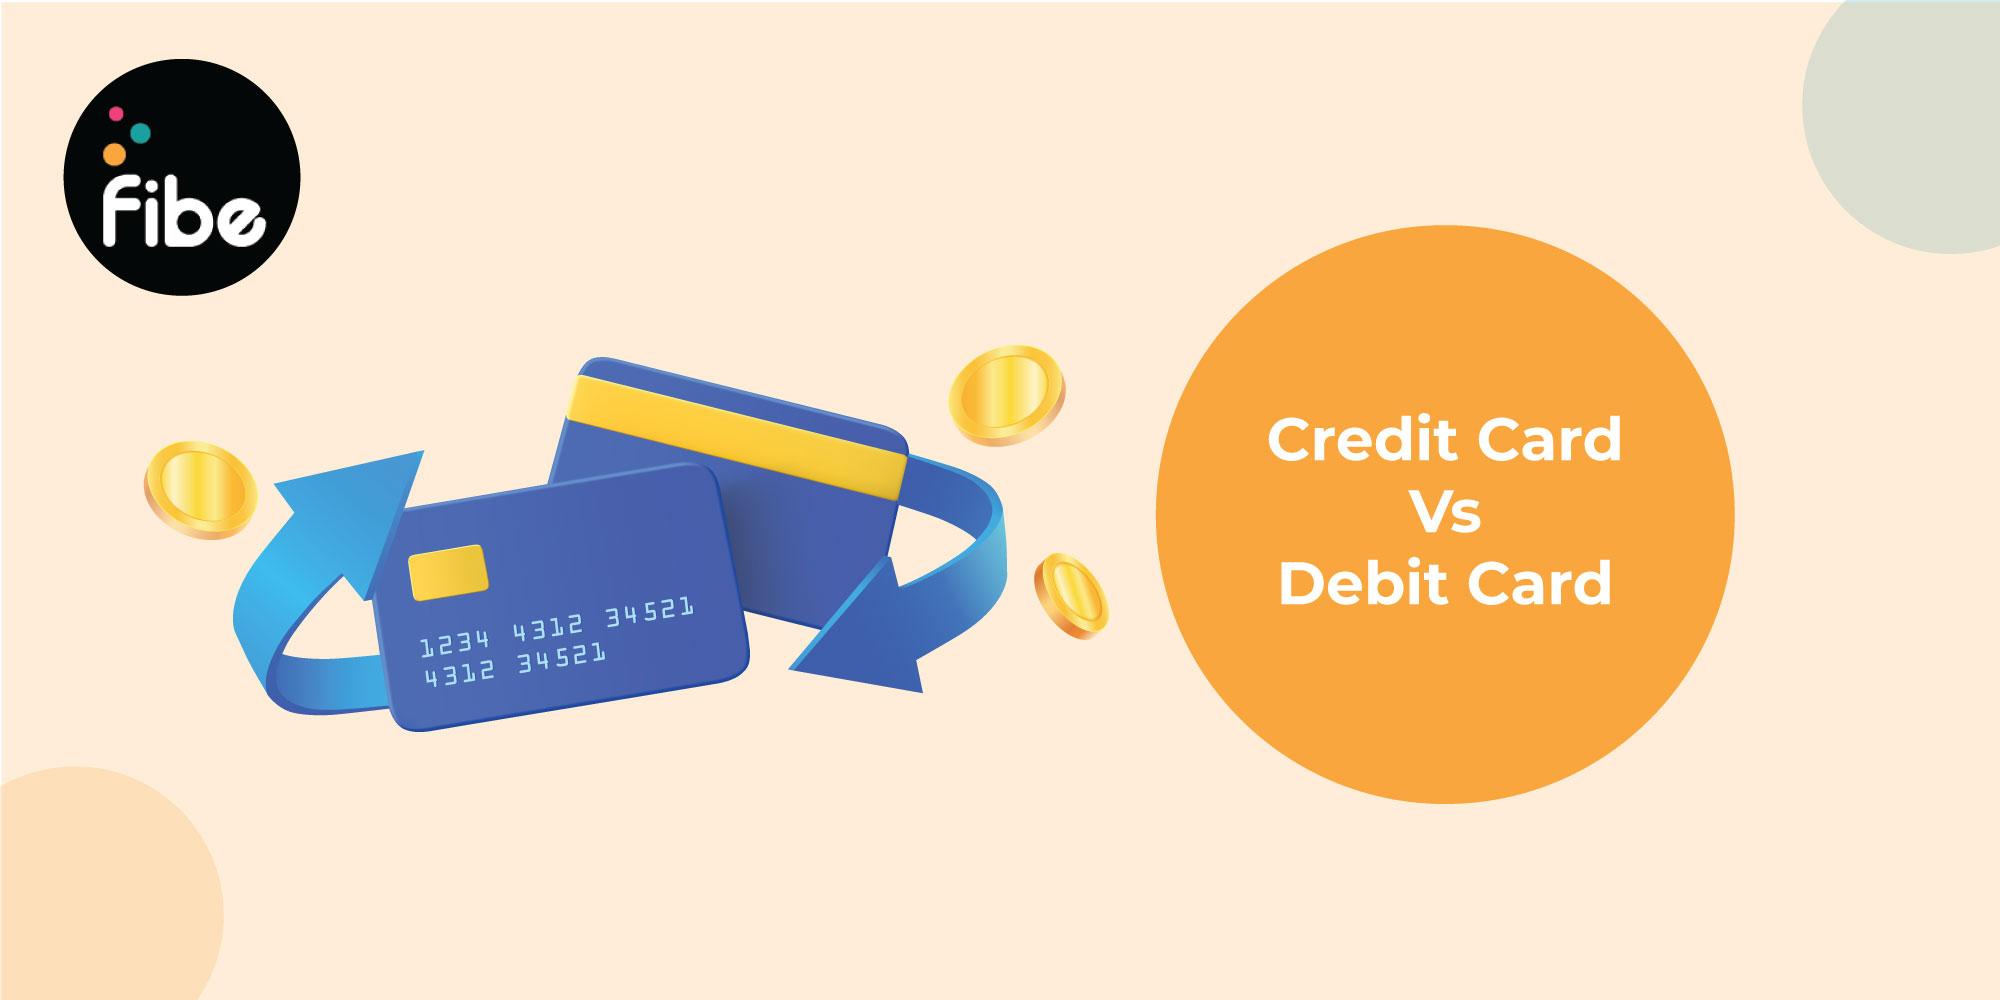 4 Key Difference Between Credit Cards & Debit Cards